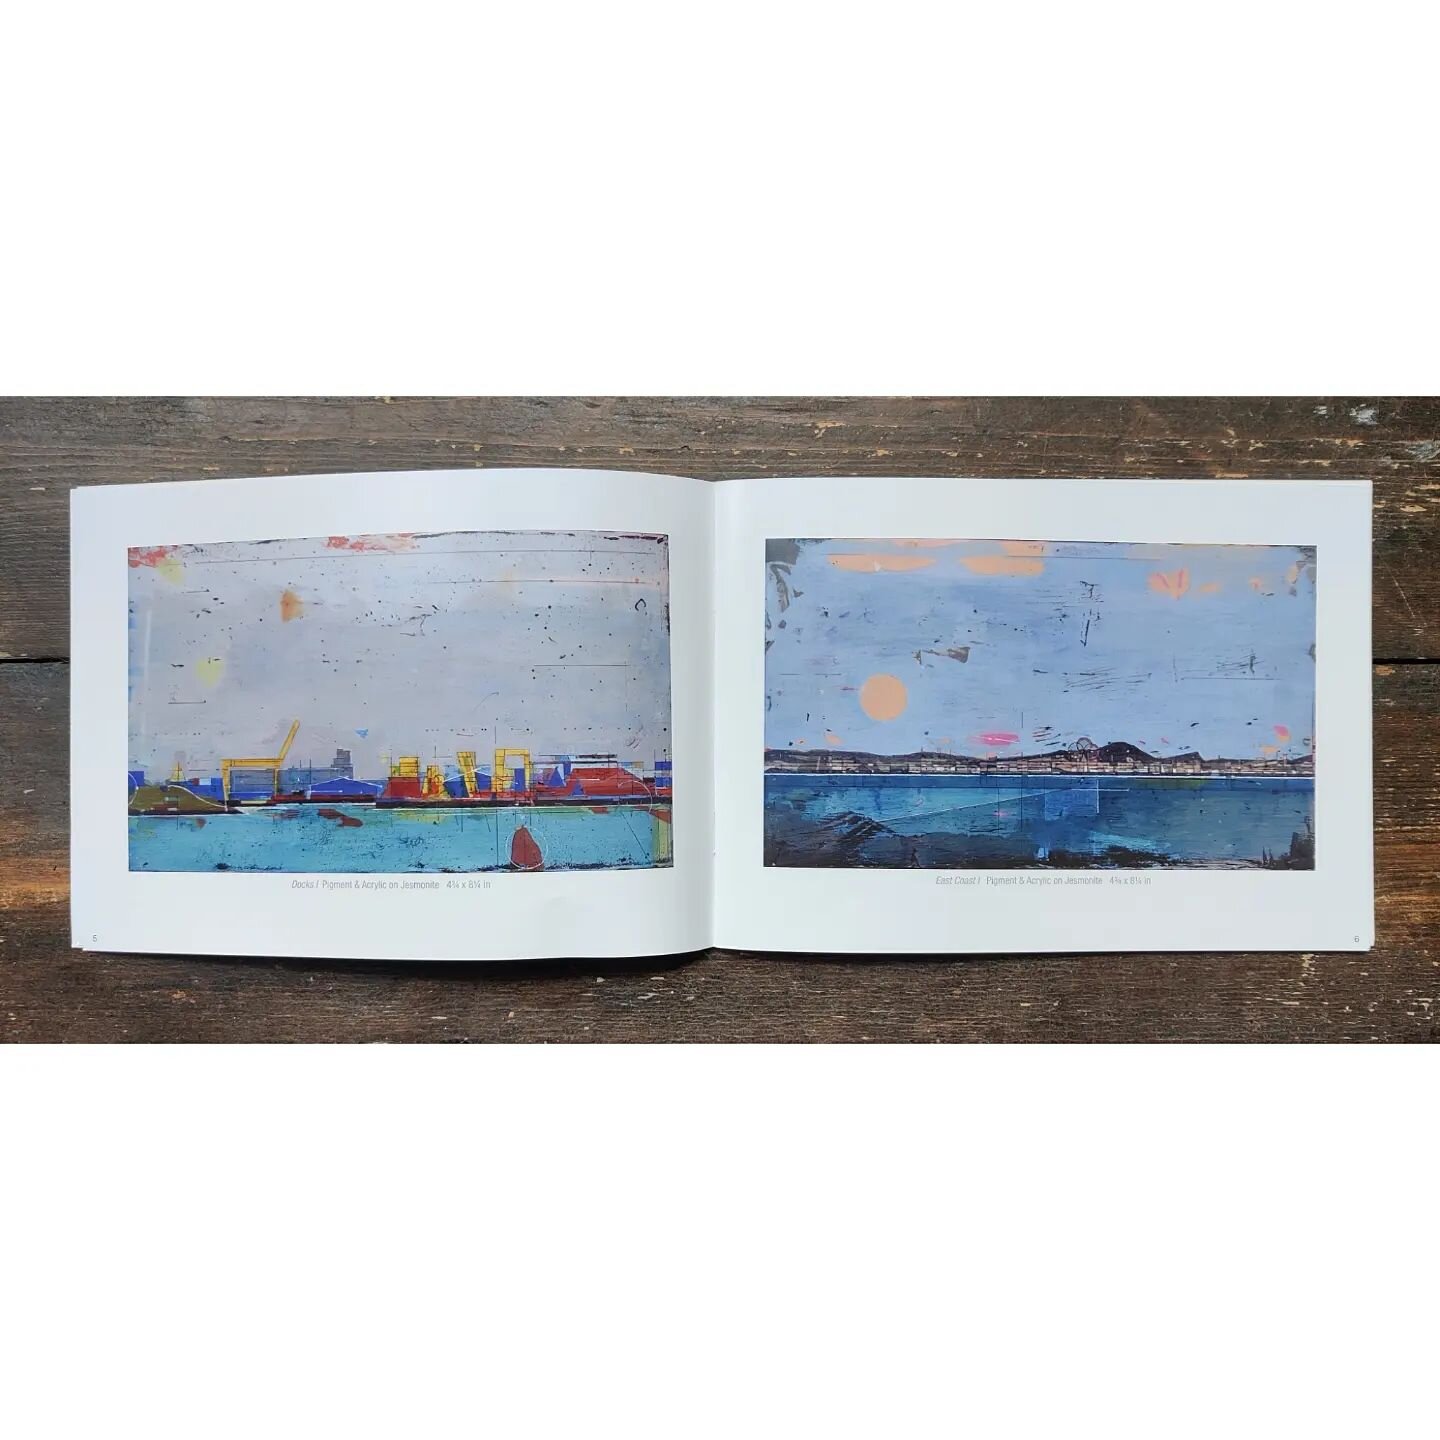 Happy to be exhibiting 6 paintings at @walkergalleries summer exhibition alongside Peter King, Mhairi McGregor and John Walsom. Images from the catalogue.
.

.
.
.
.
.
.
.
.
.
.
.
.
.
.
.
.
#scottishpainting #smallpaintings #paintingsforsale #panoram